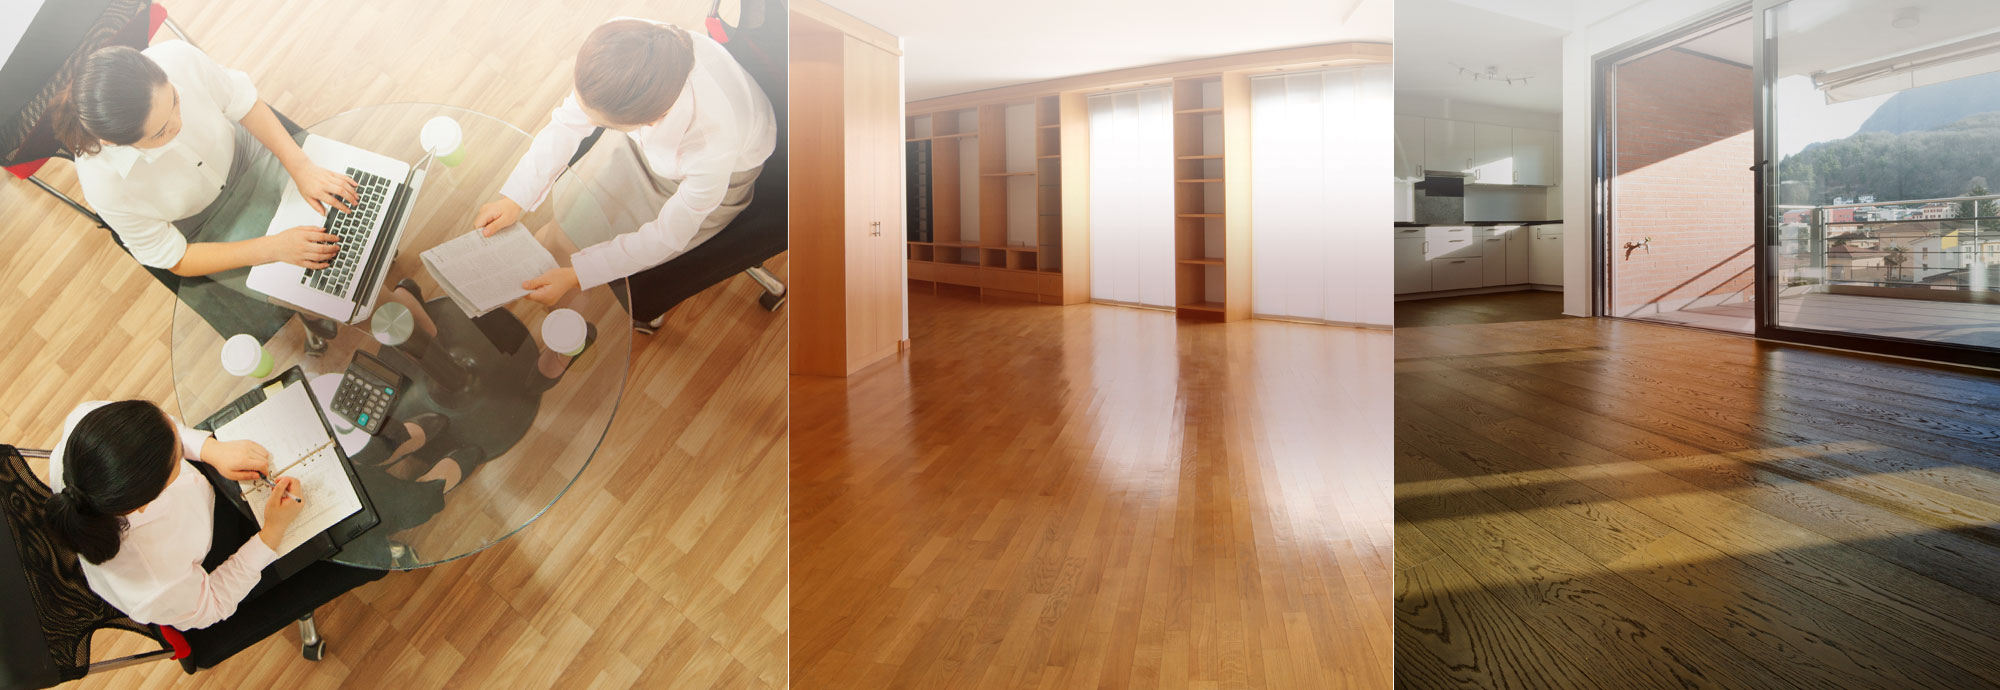 Wood flooring for the home office, kitchen, living room and bedroom